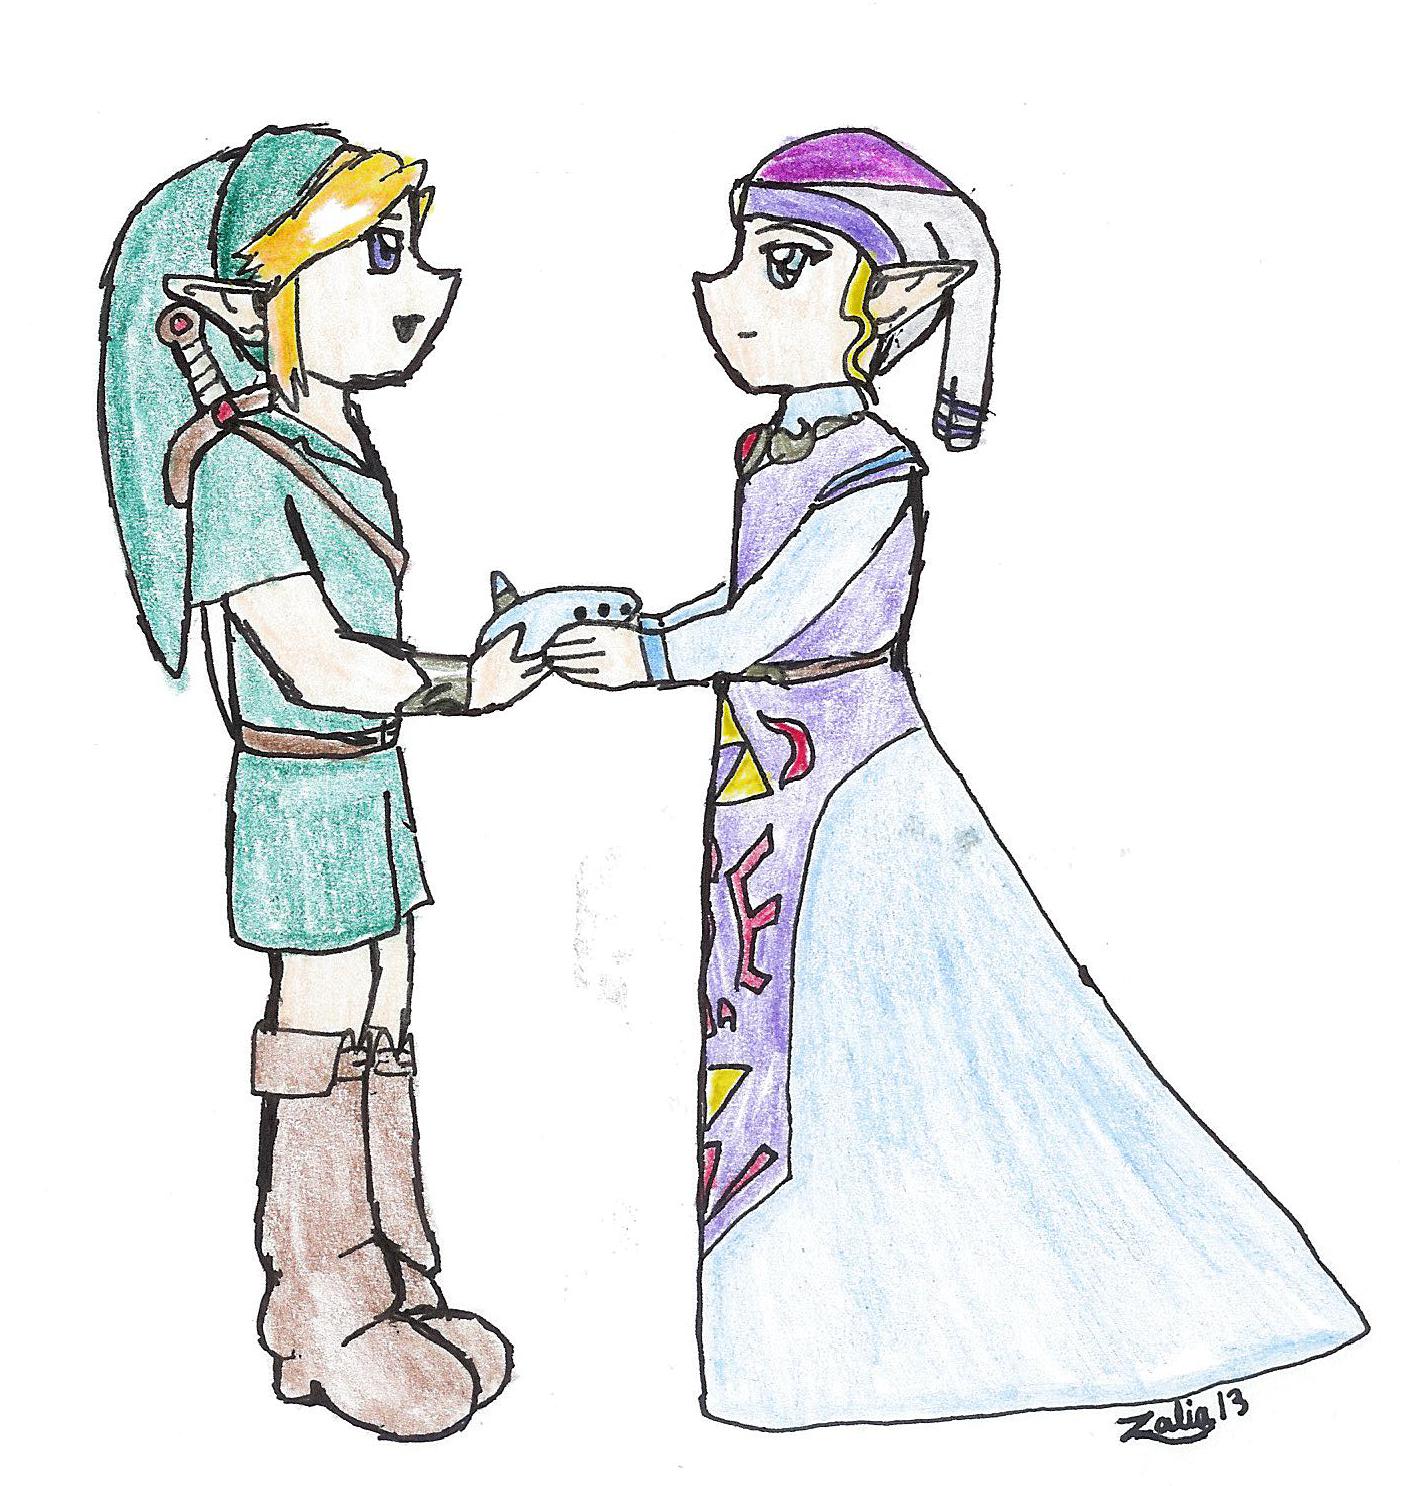 Young Link and Zelda For Rinkuchan! by Zalia13